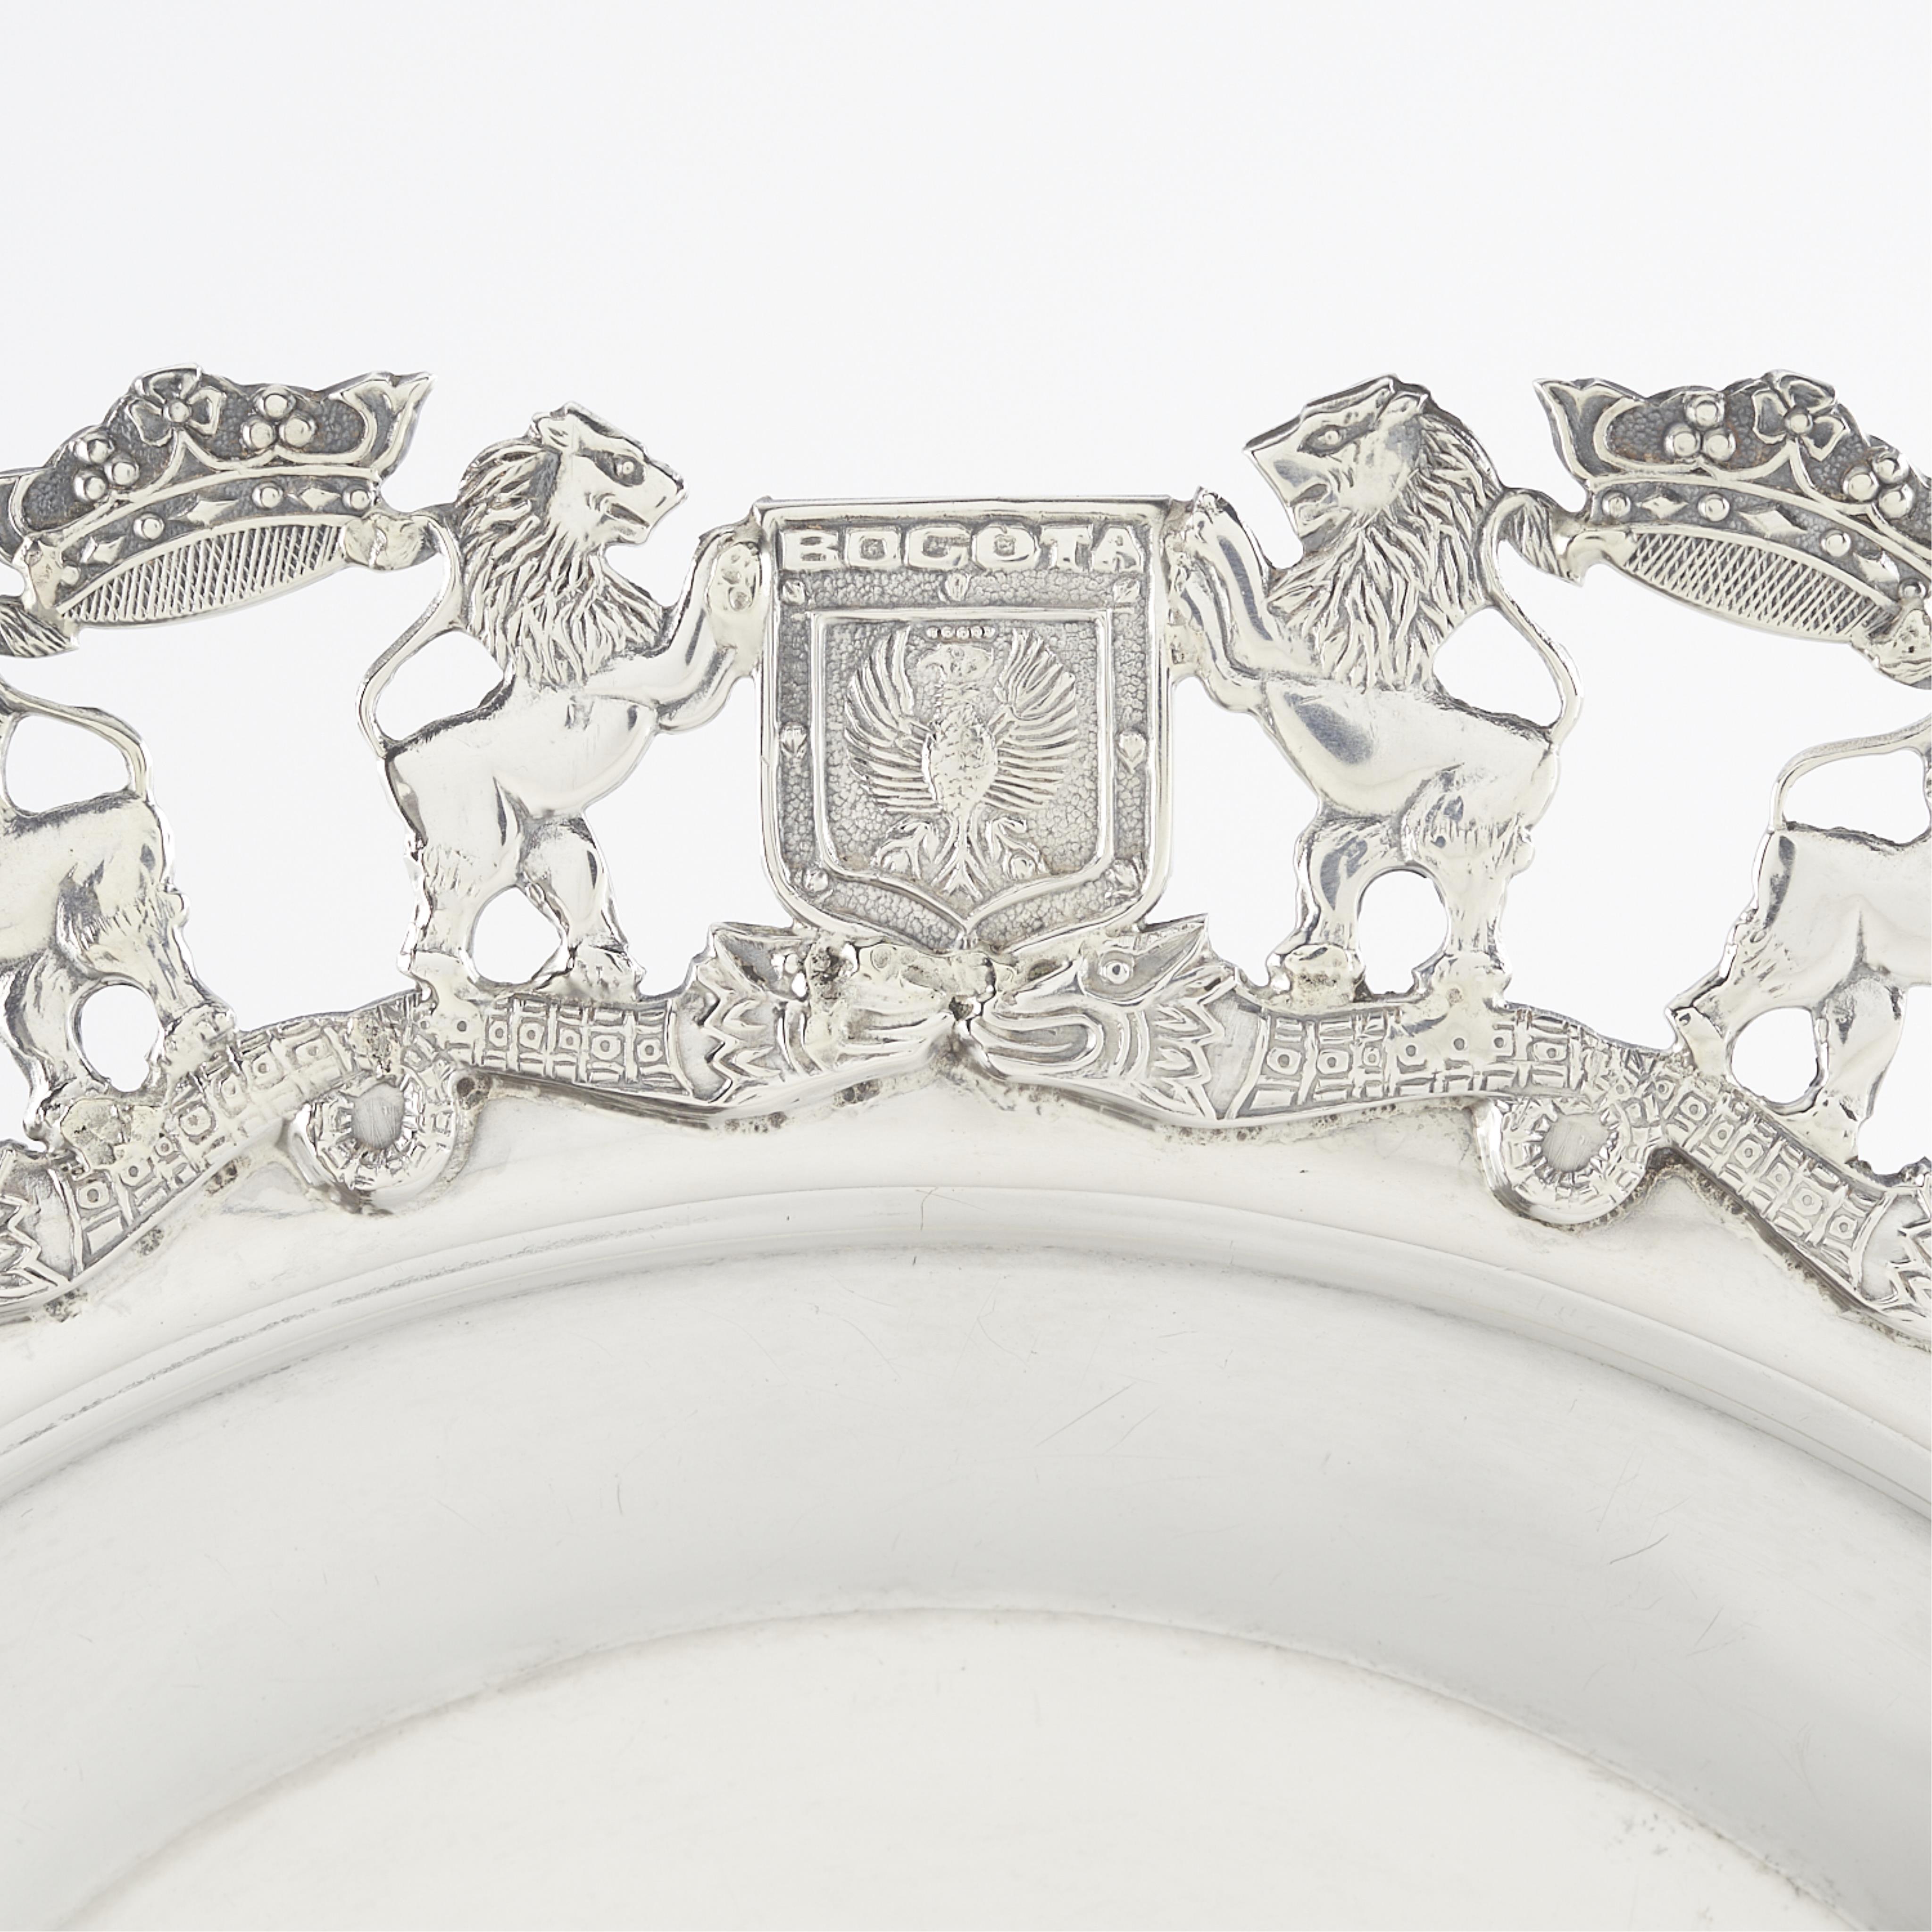 900 Silver Platter w/ Colombian Cities' Seals - Image 6 of 6